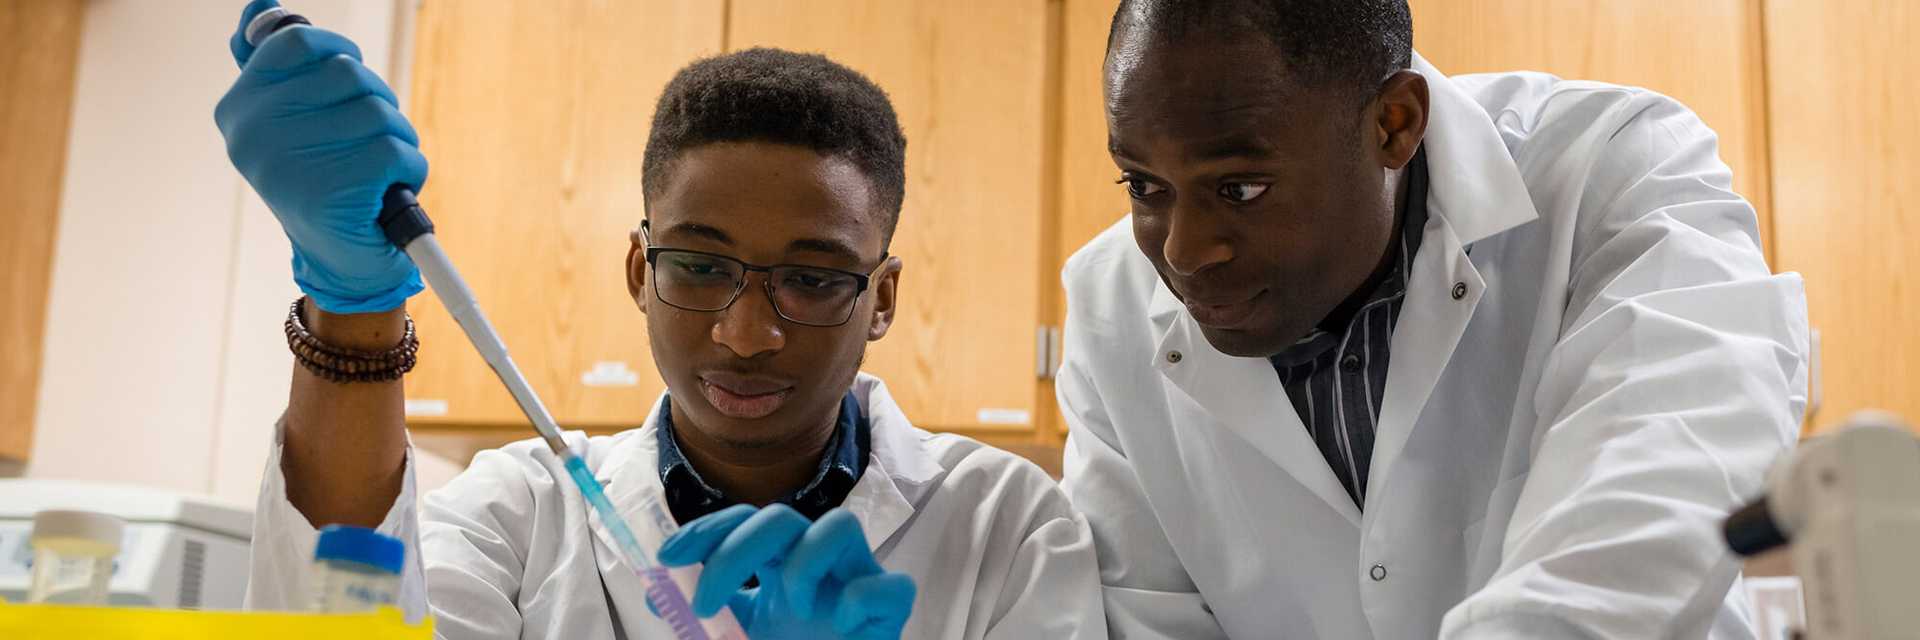 Photo of a Case Western Reserve University student and faculty member conducting engineering research together using a syringe